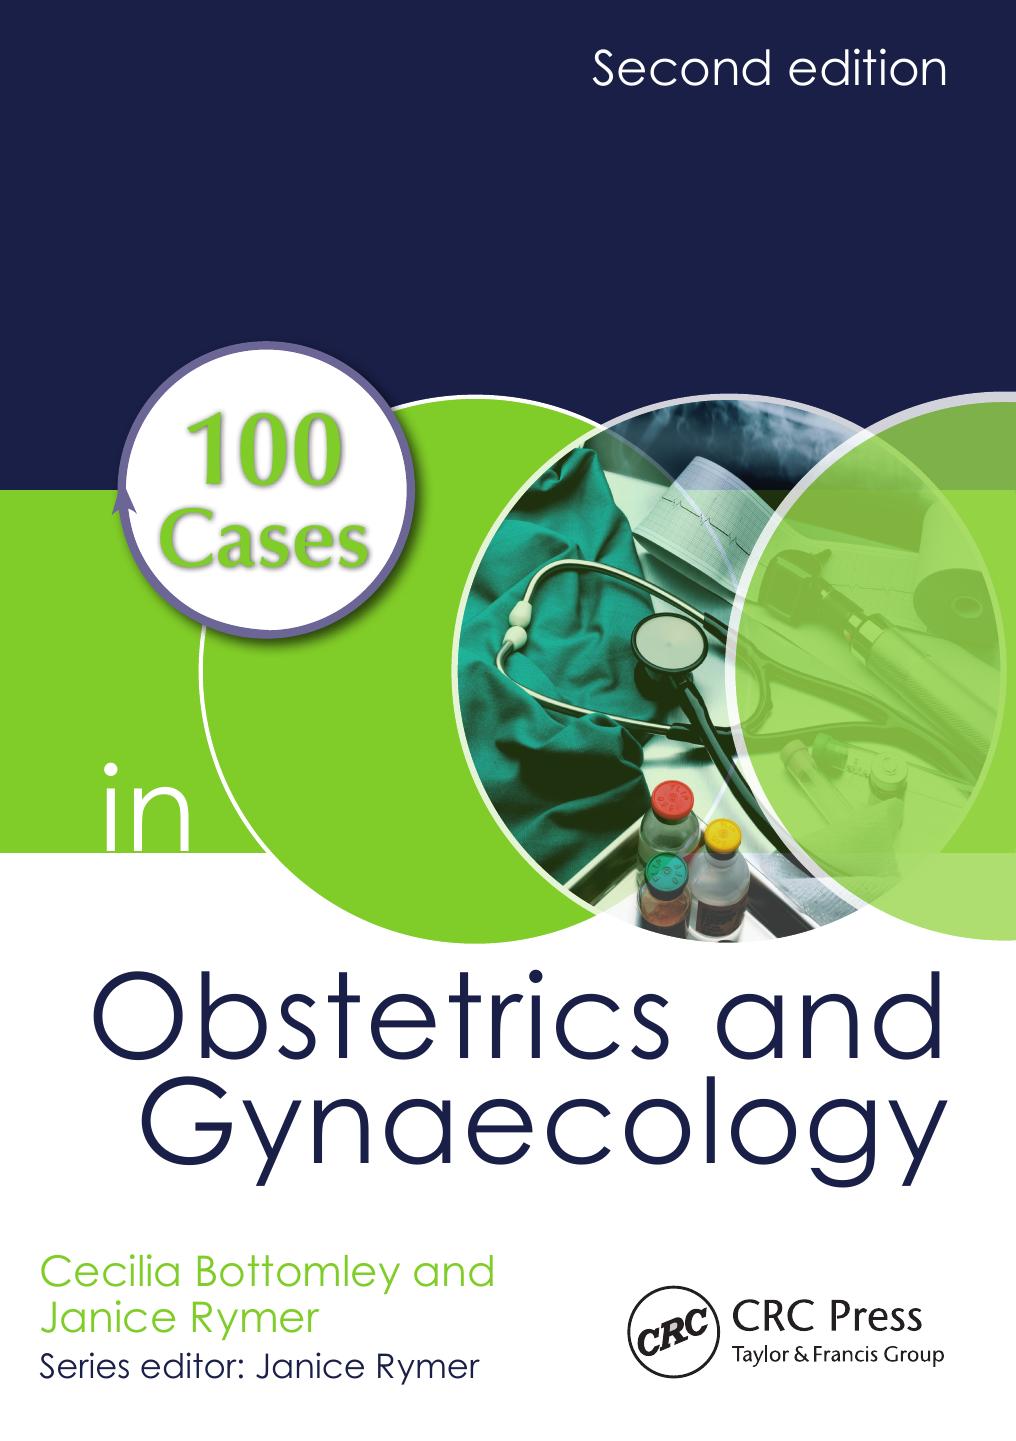 100 Cases in Obstetrics and Gynaecology, Second Edition.jpg